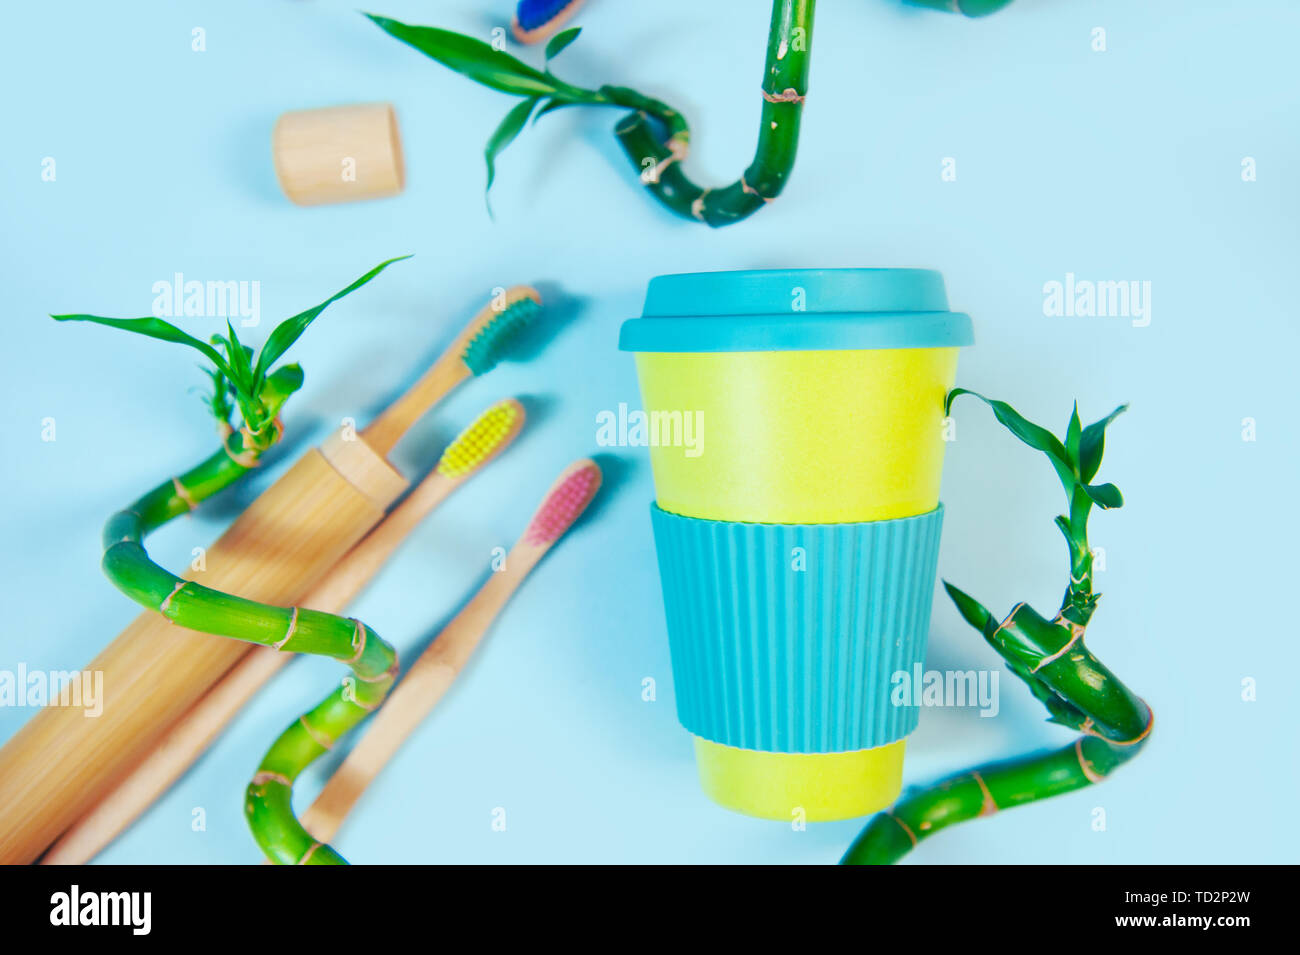 https://c8.alamy.com/comp/TD2P2W/zero-waste-concept-stylish-reusable-eco-coffee-cup-and-green-bamboo-leaves-TD2P2W.jpg